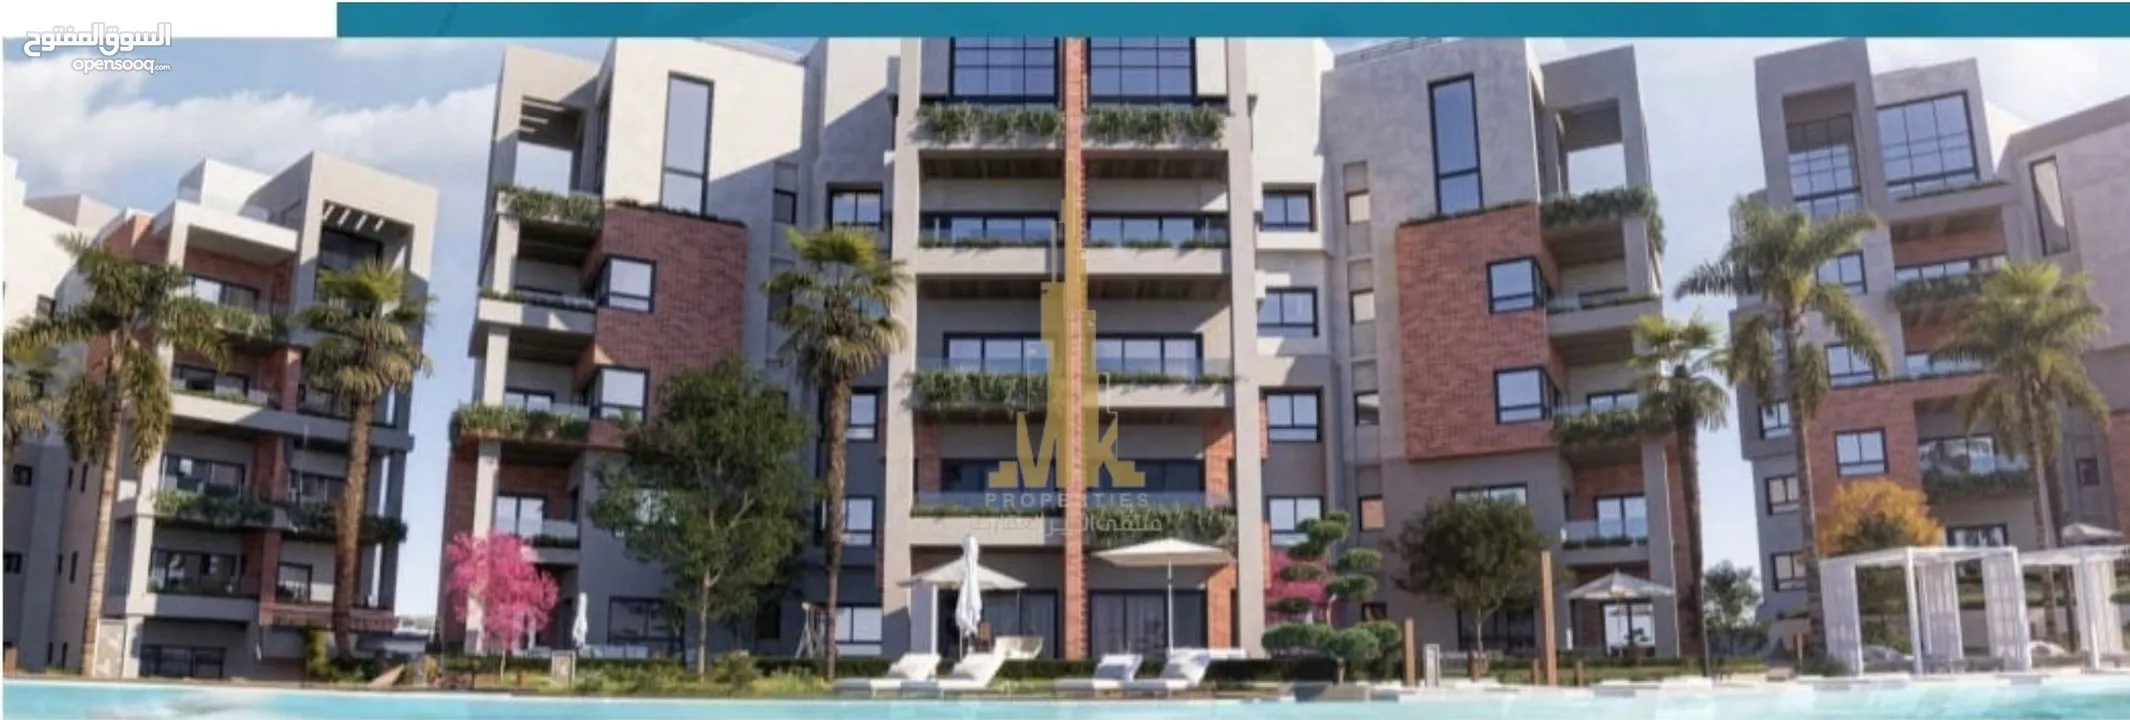 Apartment for sale in Muscat bay/ New project (Zen) / Two bedrooms/ Freehold/ Lifetime residency